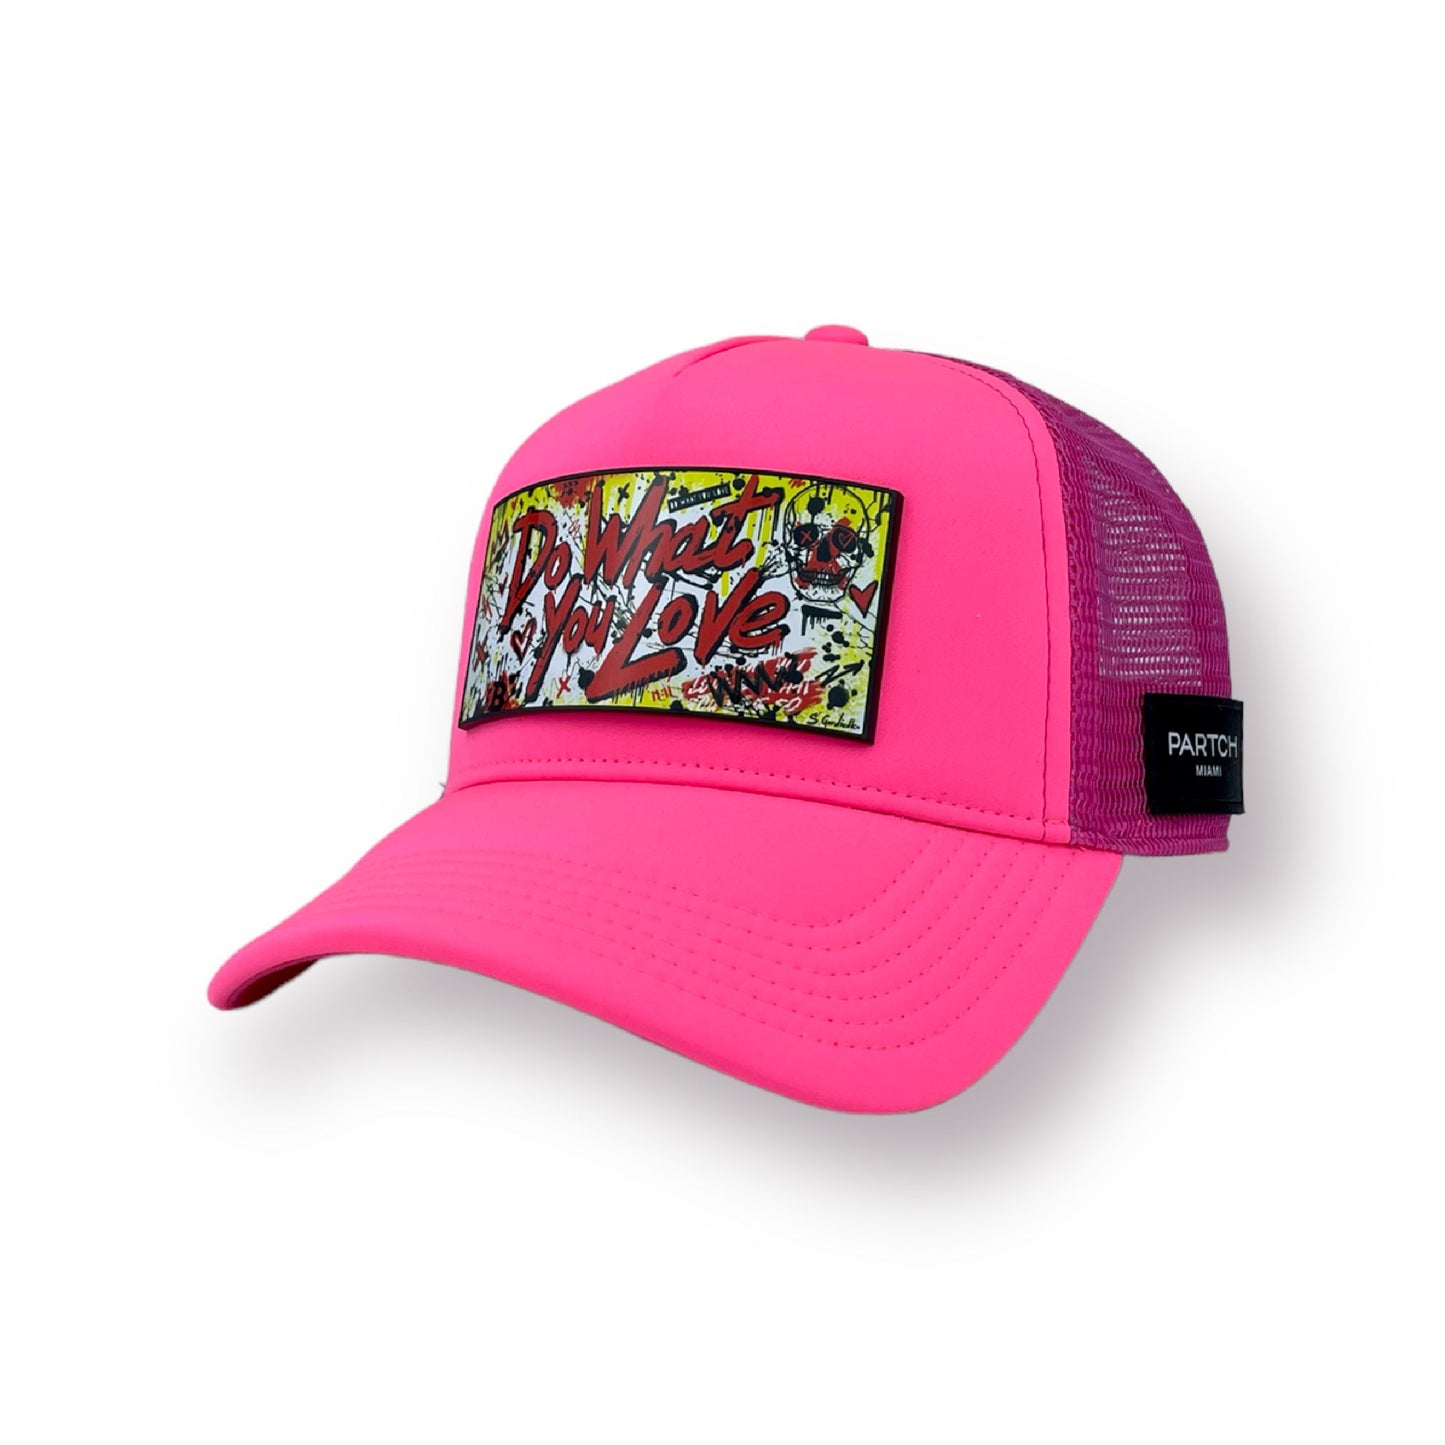 PARTCH trucker hat pink do what you love art Partch-clip removable